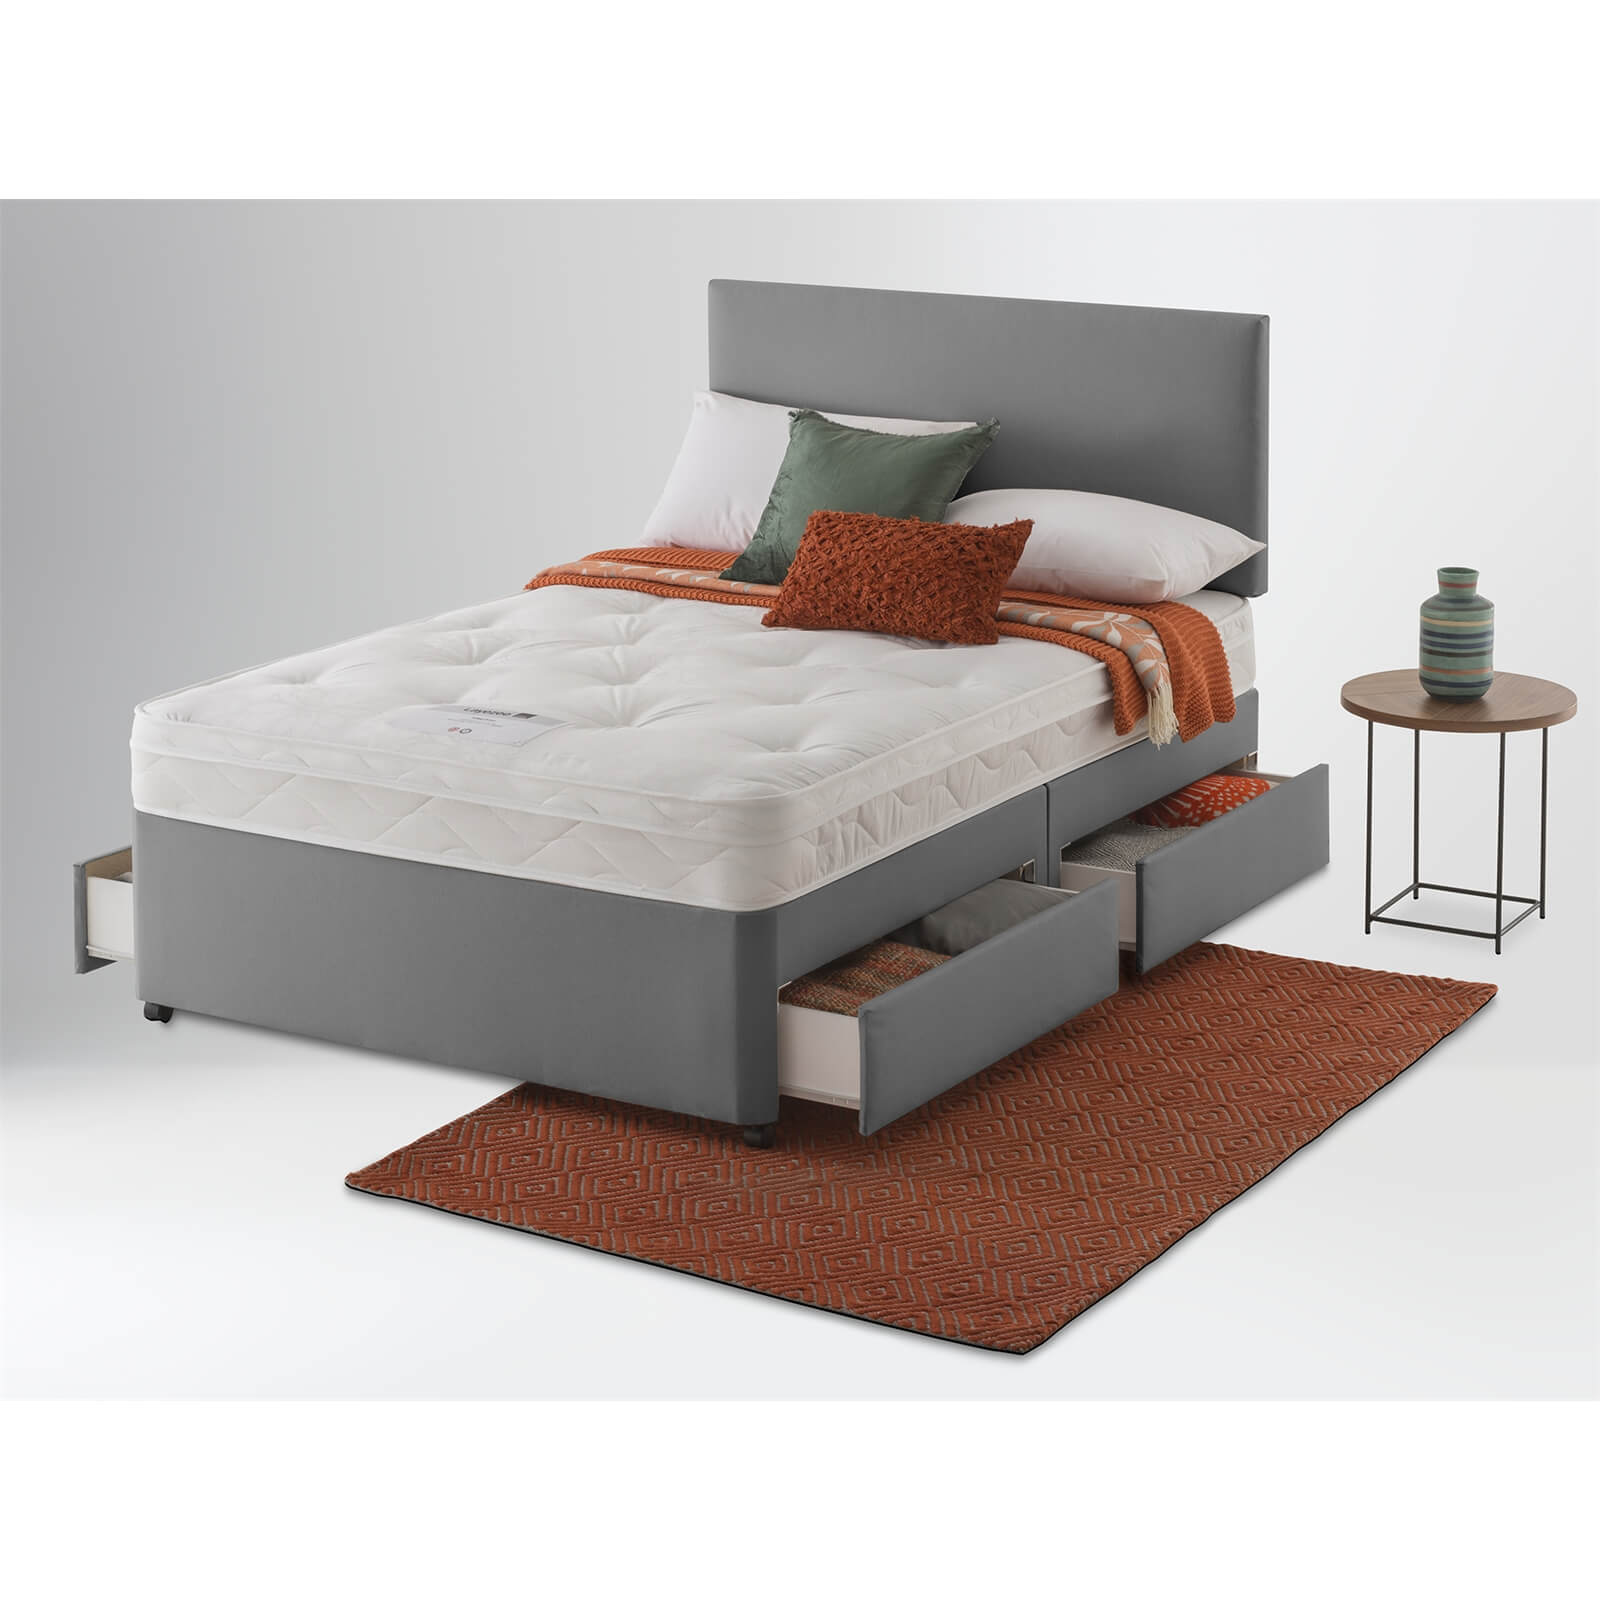 Layzee by Silentnight Ortho Divan Bed 4 Drawer - Slate Grey - Double